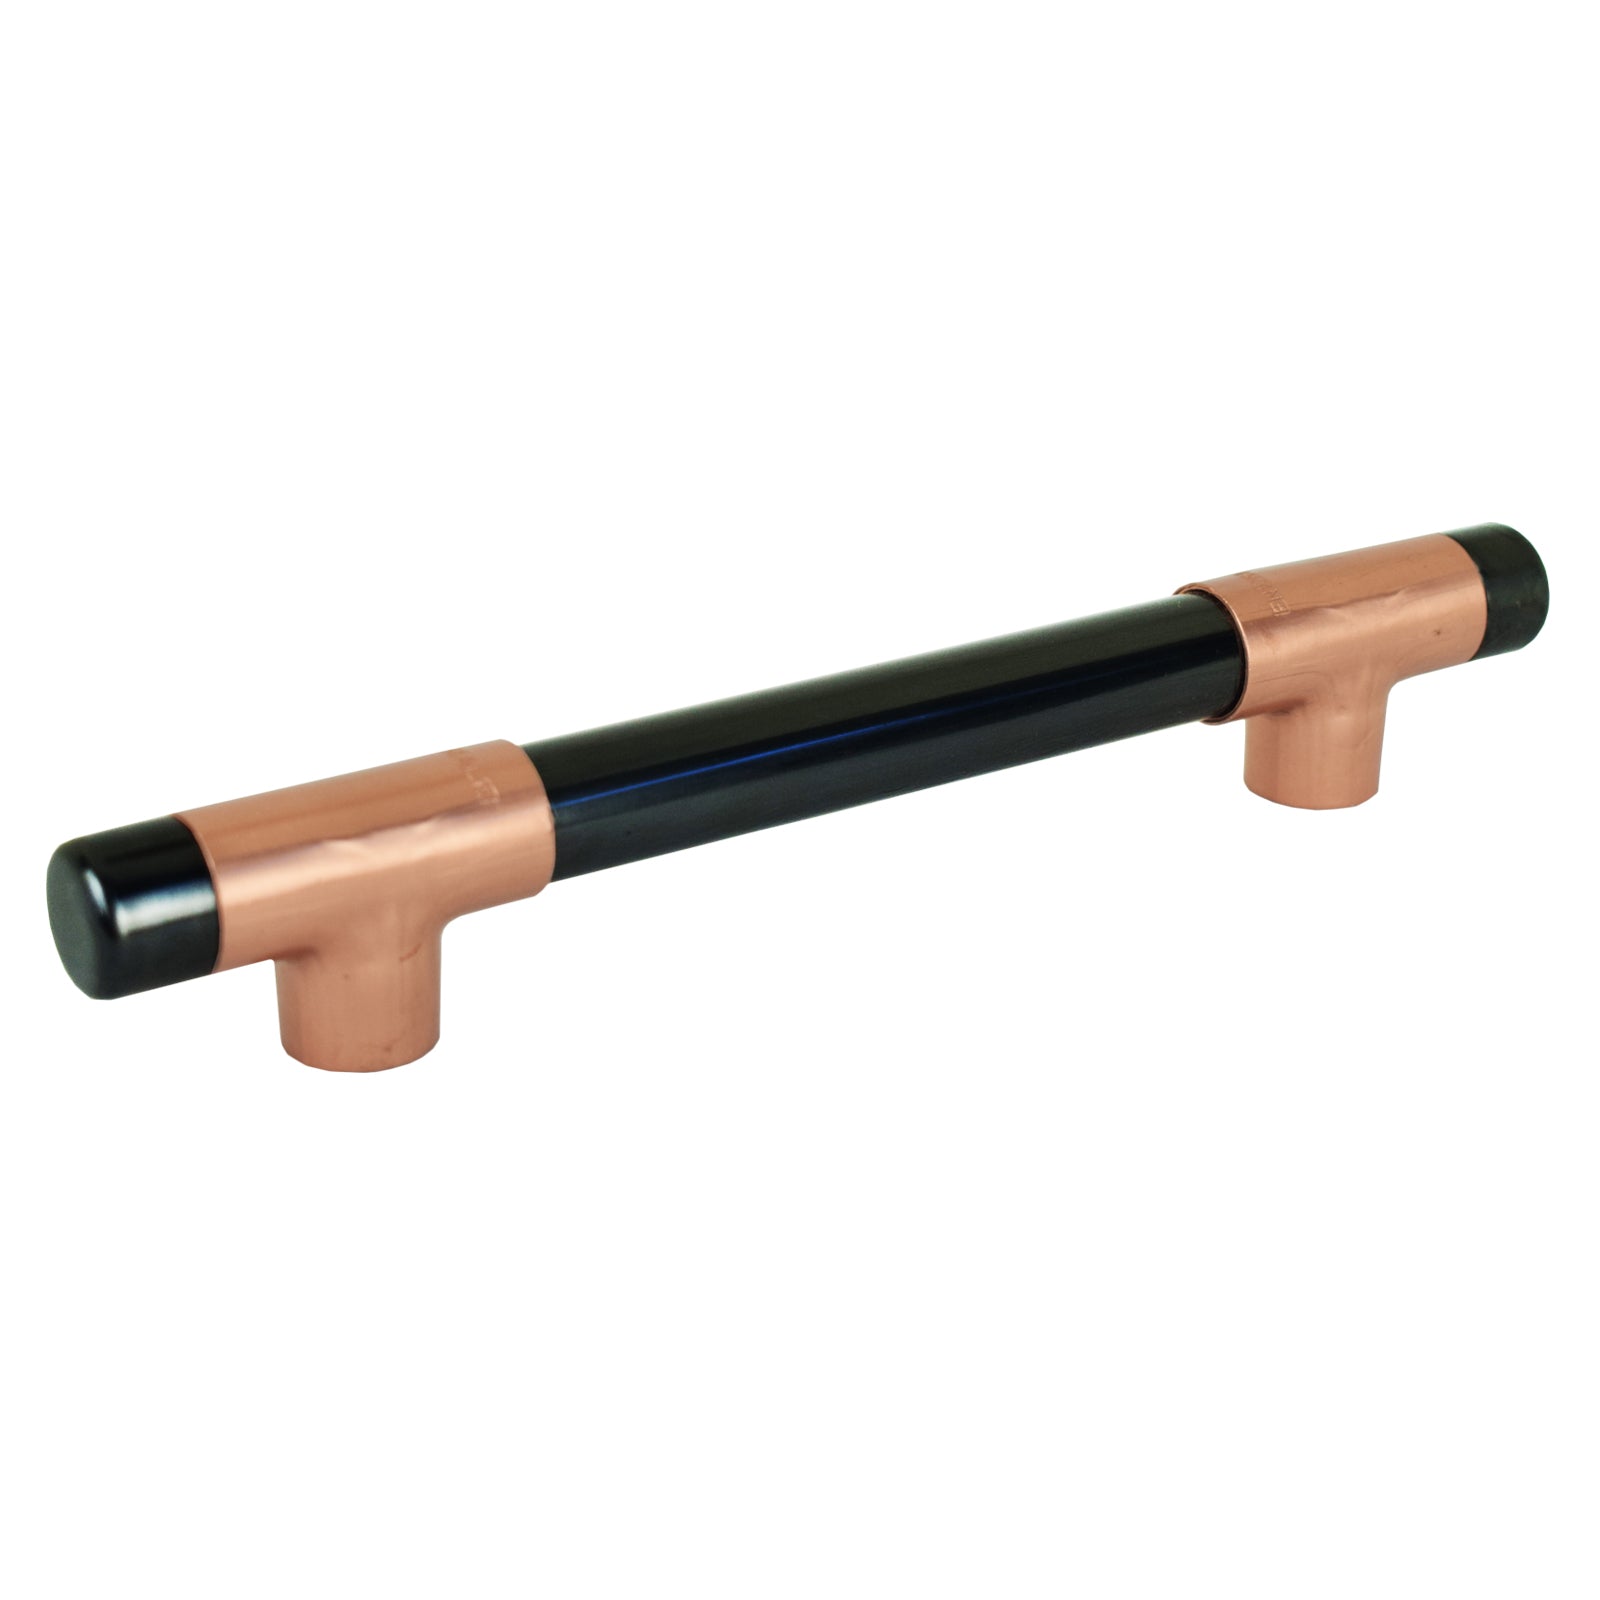 Matt Black Handle and Copper Mix - On white background